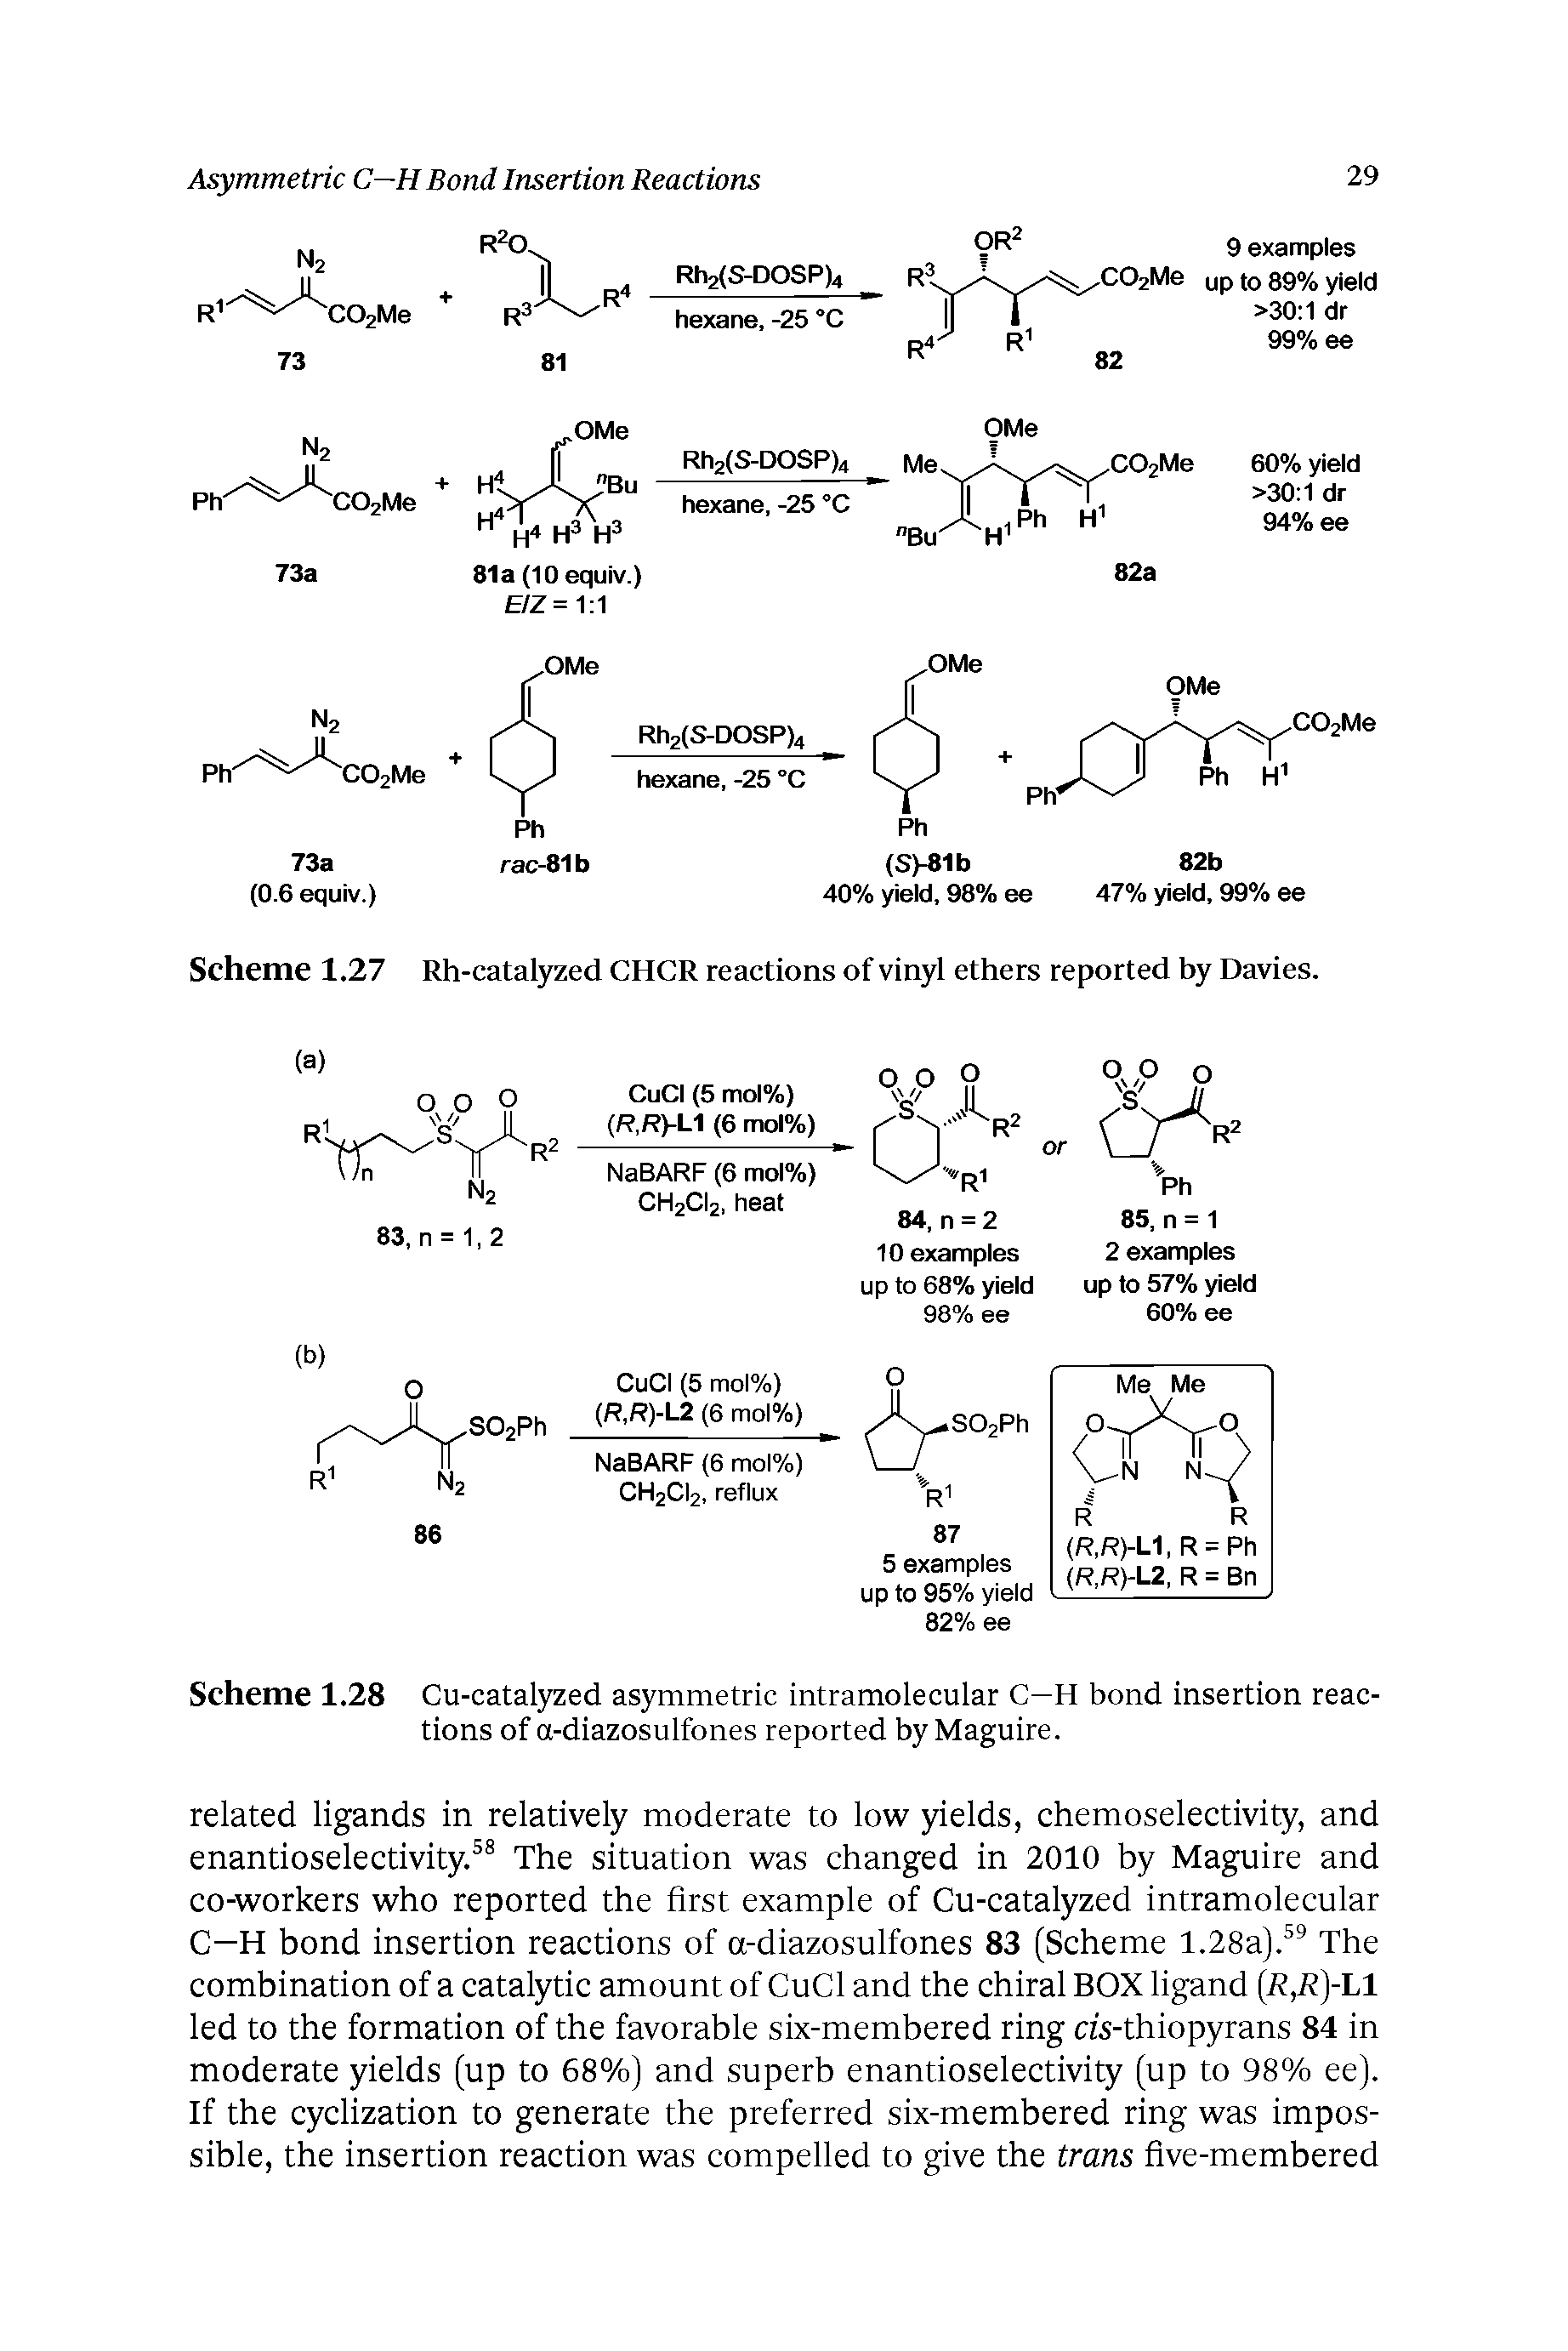 Scheme 1.28 Cu-catalyzed asymmetric intramolecular C—H bond insertion reactions of a-diazosulfones reported by Maguire.